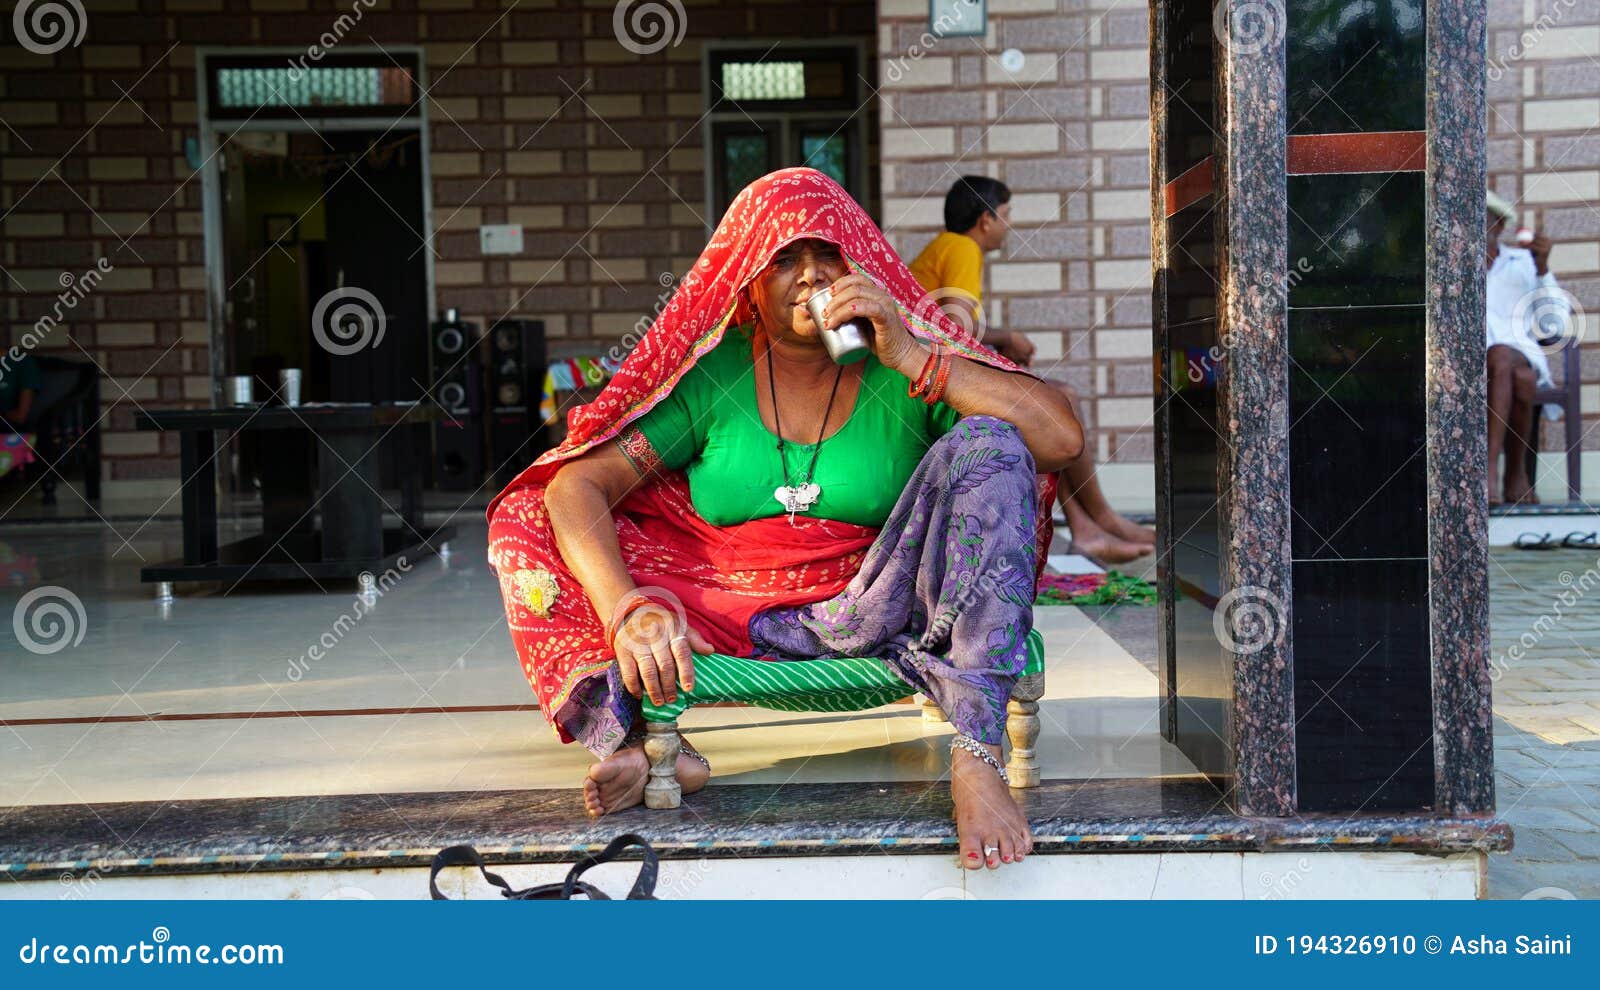 In Traditional Ornamented Dress, Rajasthani Old Woman Taking Tea ...